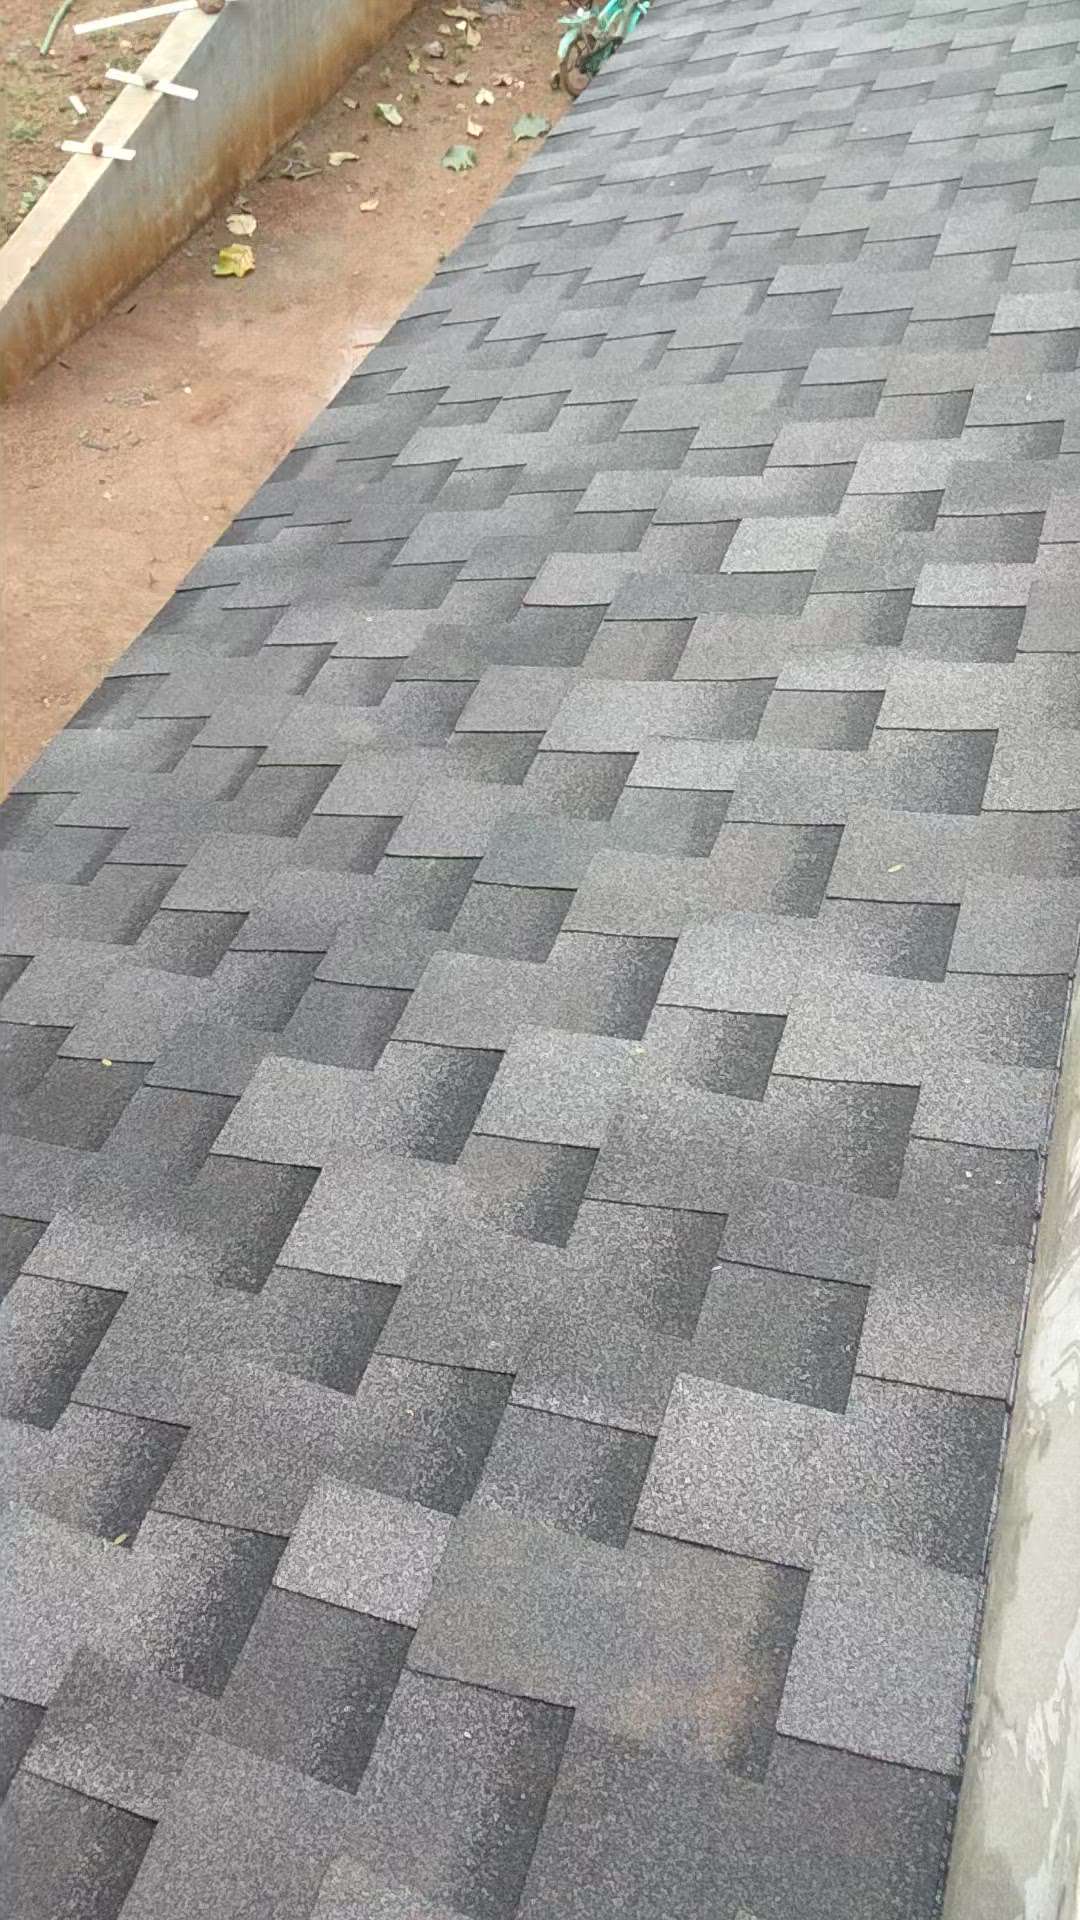 SHINGLES WORK COMPLETED SITE MANNRKKAD
SHINGLES CERAMIC CALL NOW:9544193838